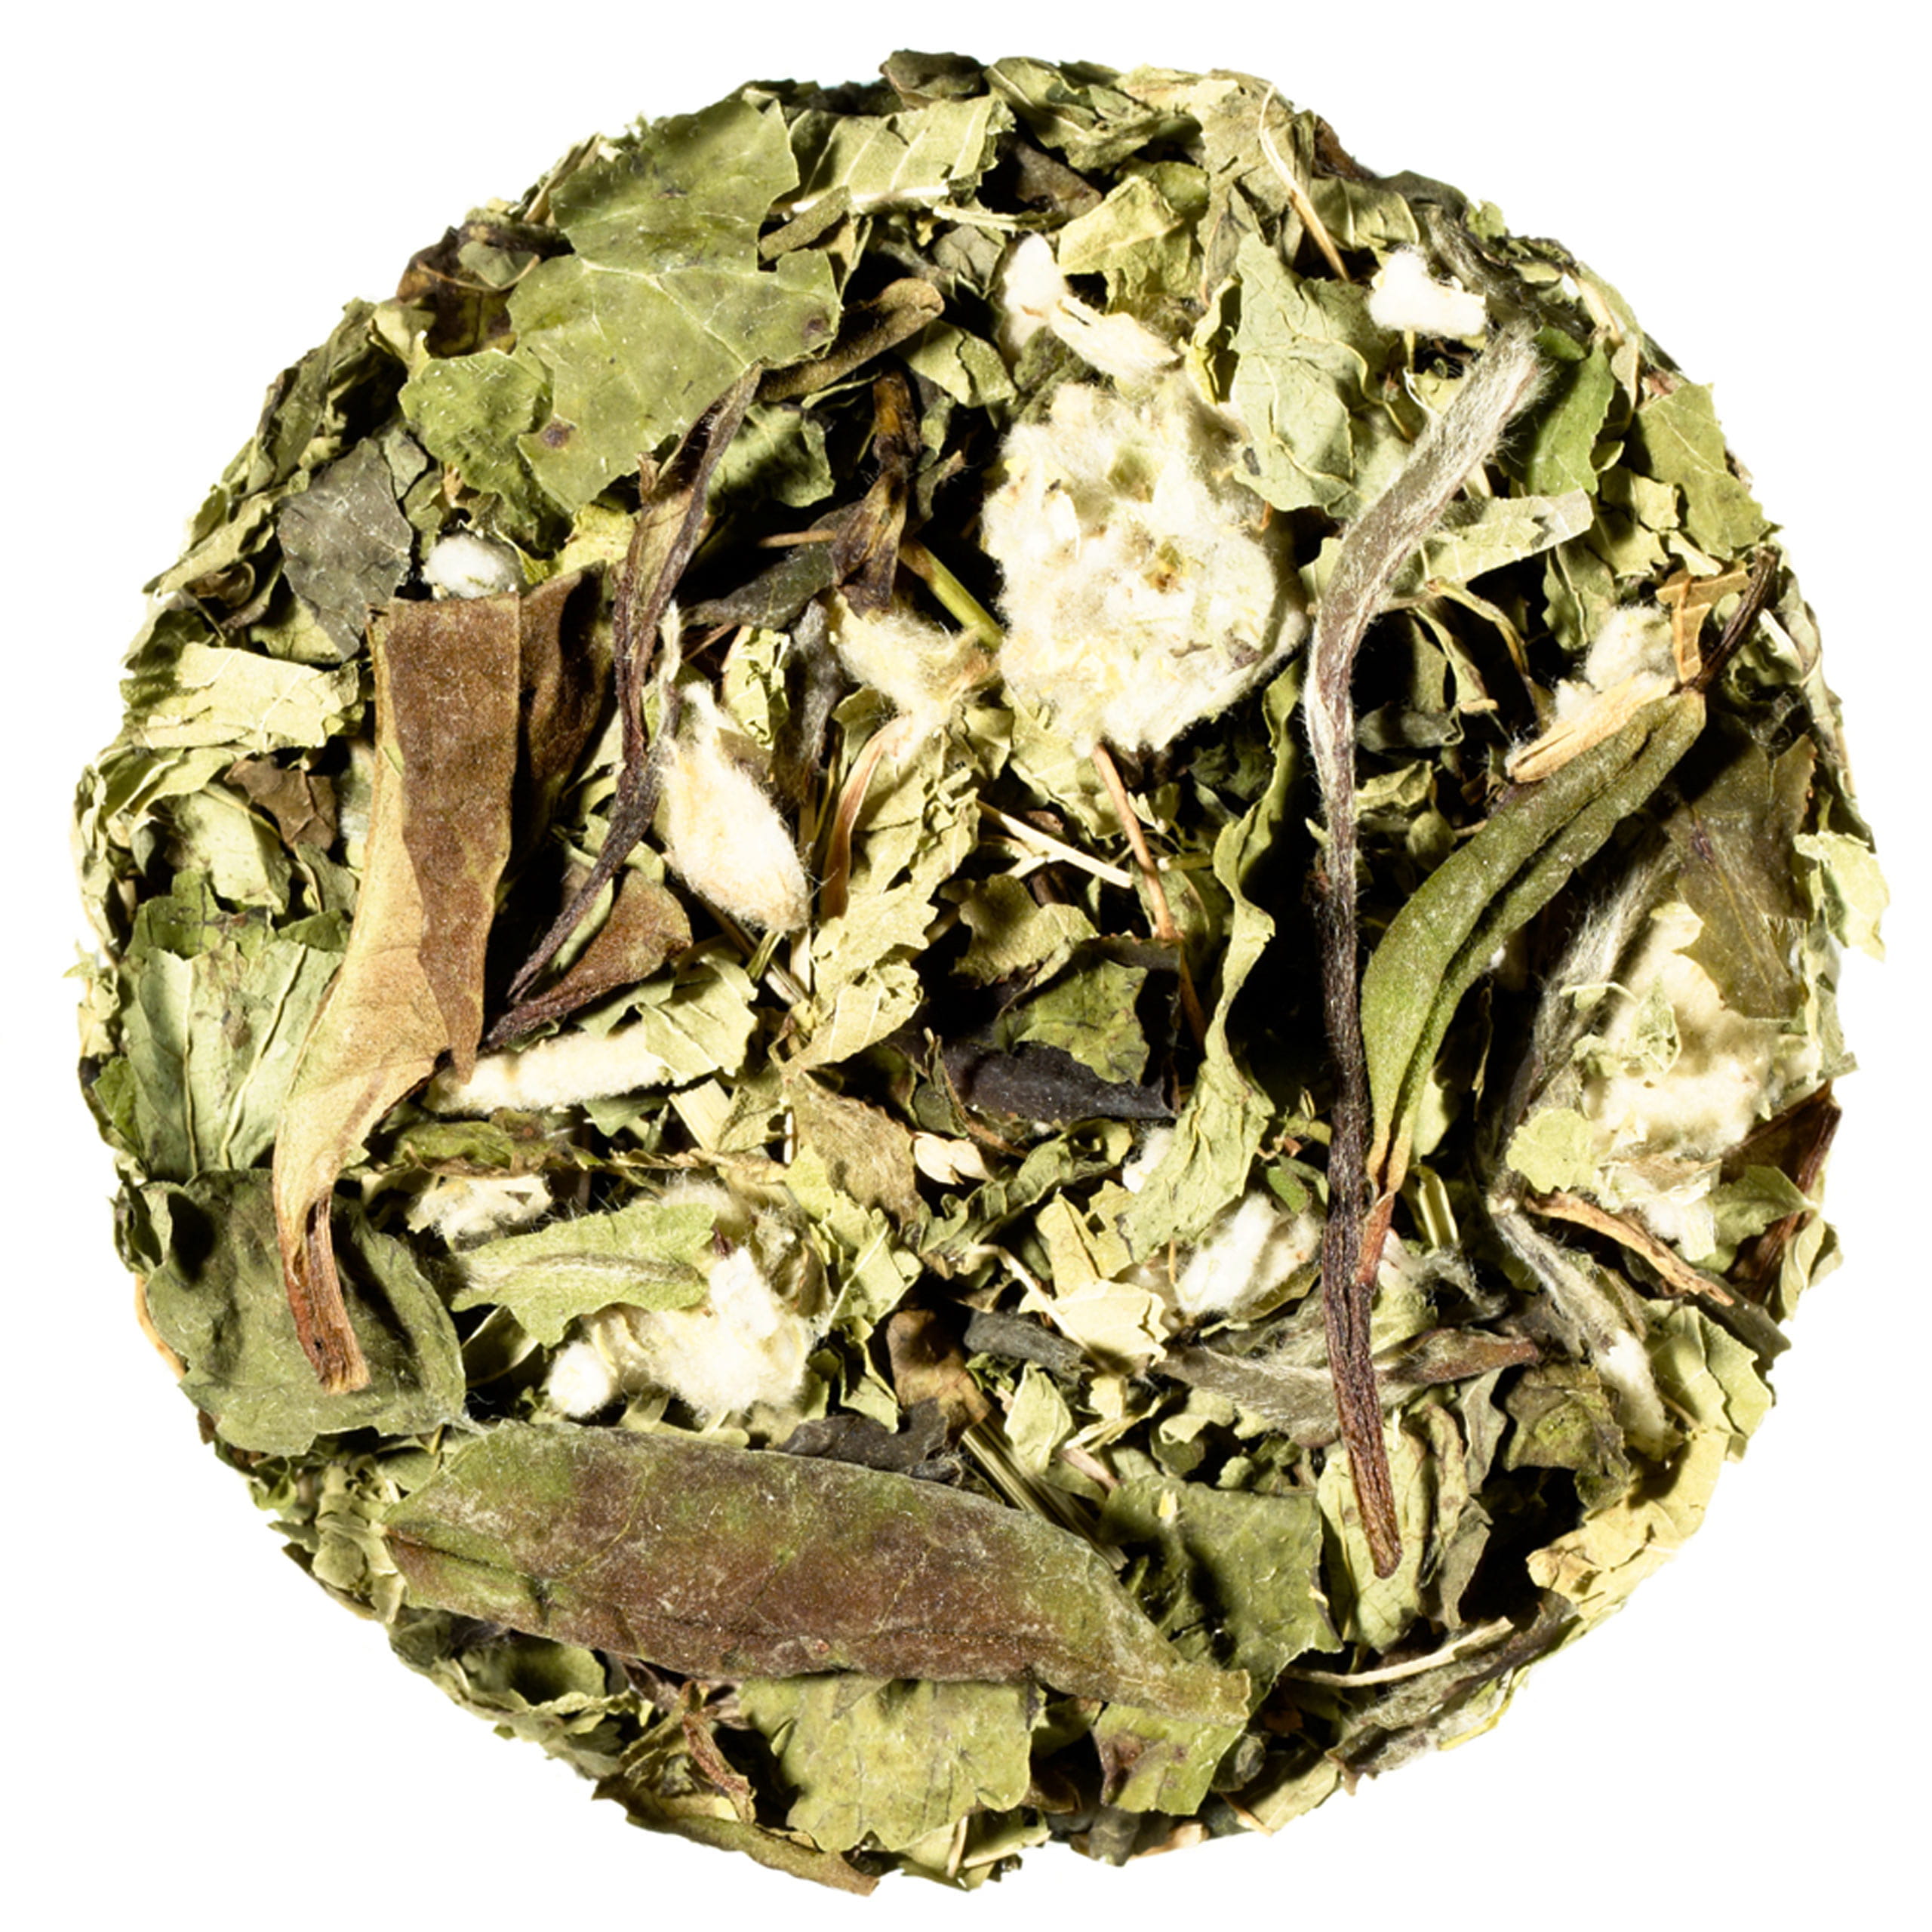 Composition of Green Chill tea